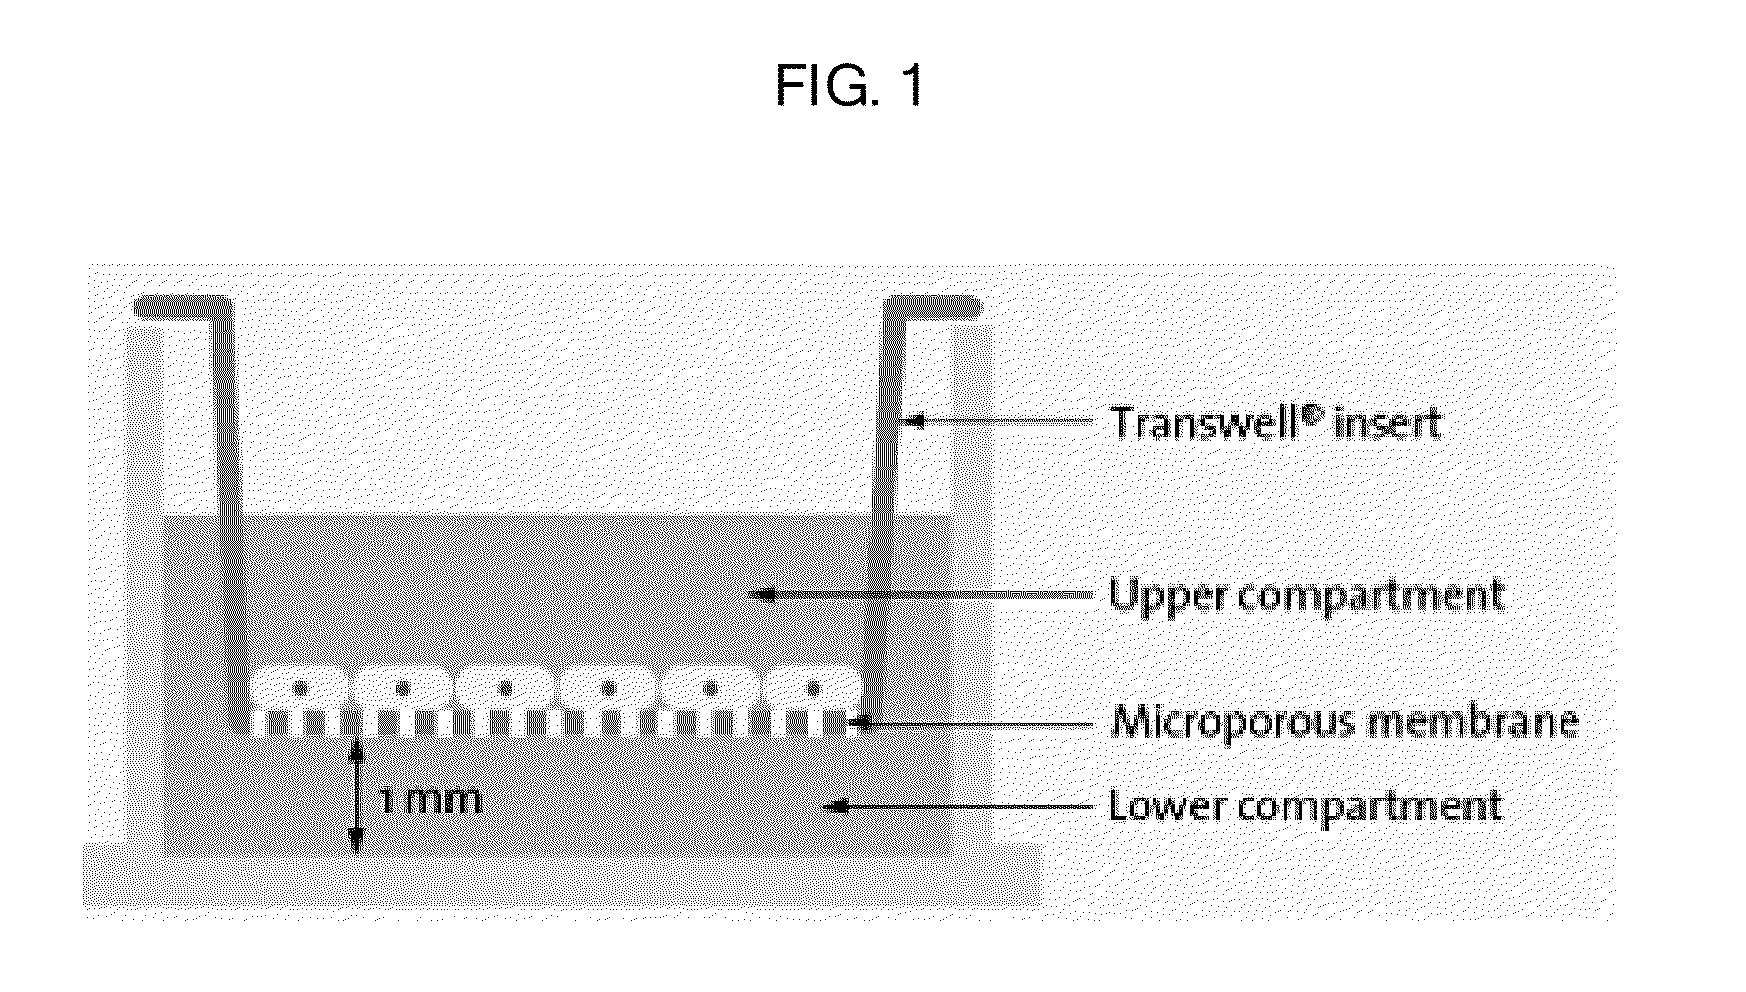 Composition containing human umbilical cord blood-derived mesenchymal stem cell for inducing differentiation and proliferation of neural precursor cells or neural stem cells to neural cells